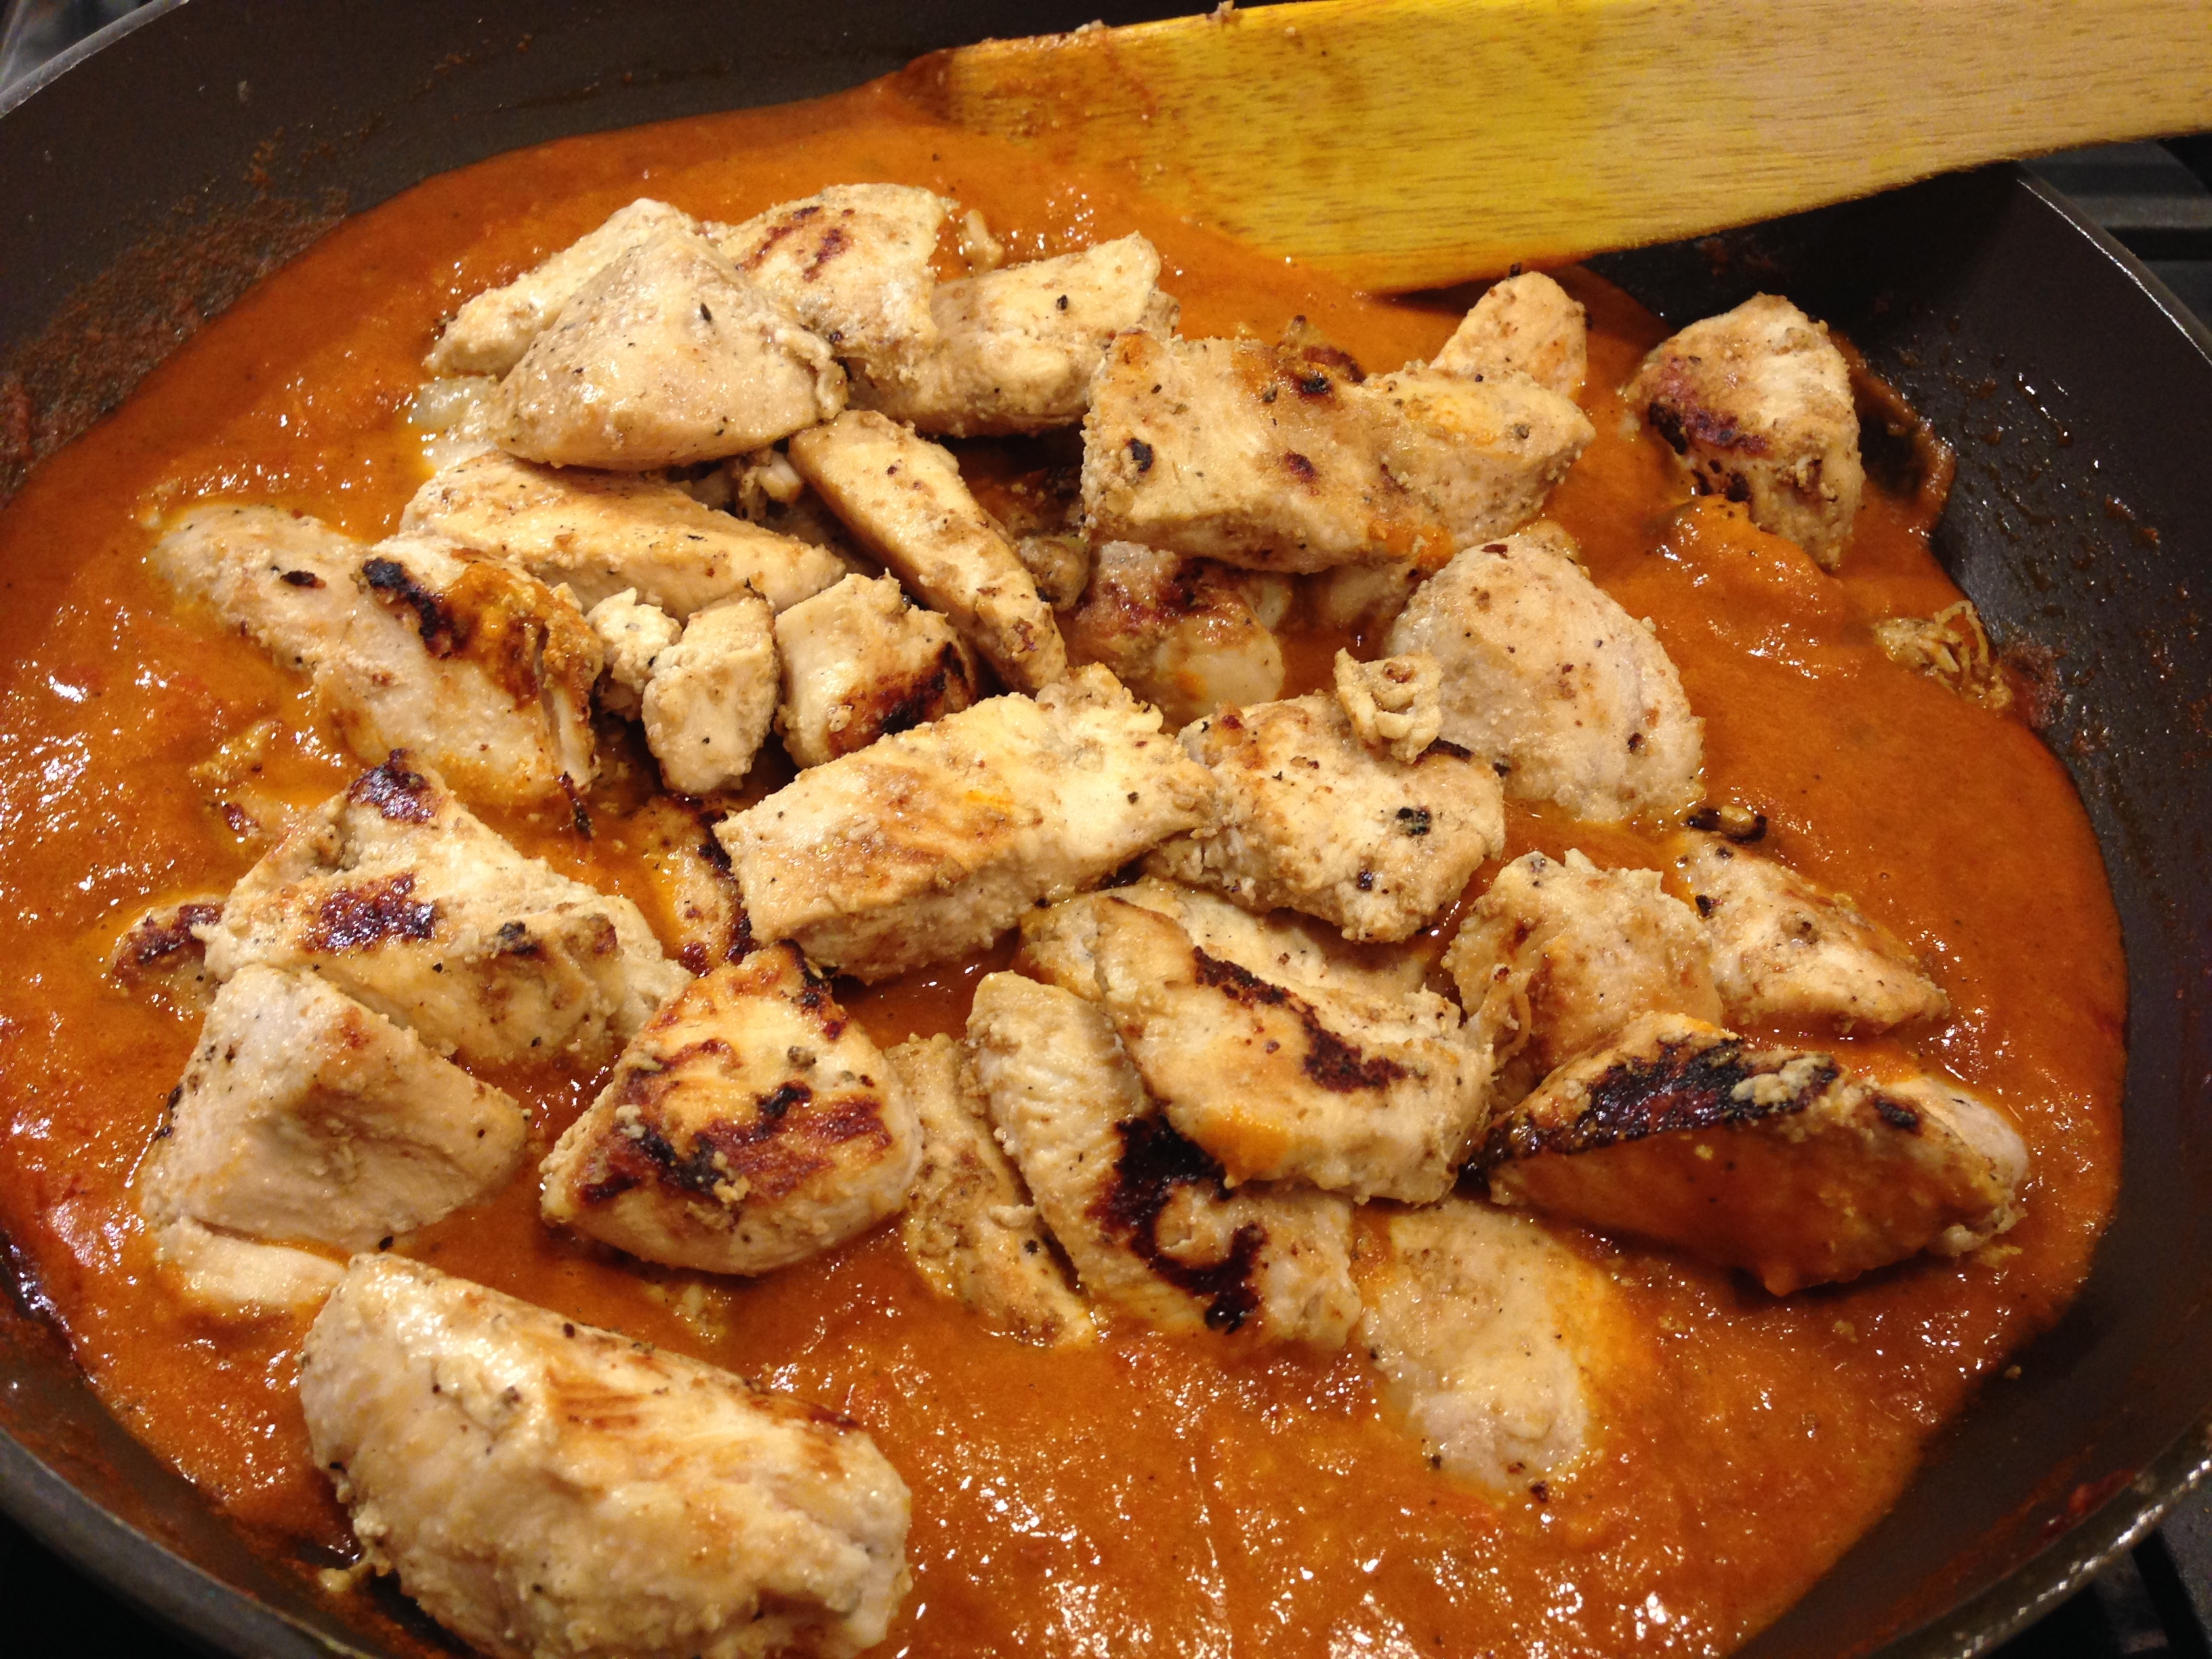 Add chicken back into pan